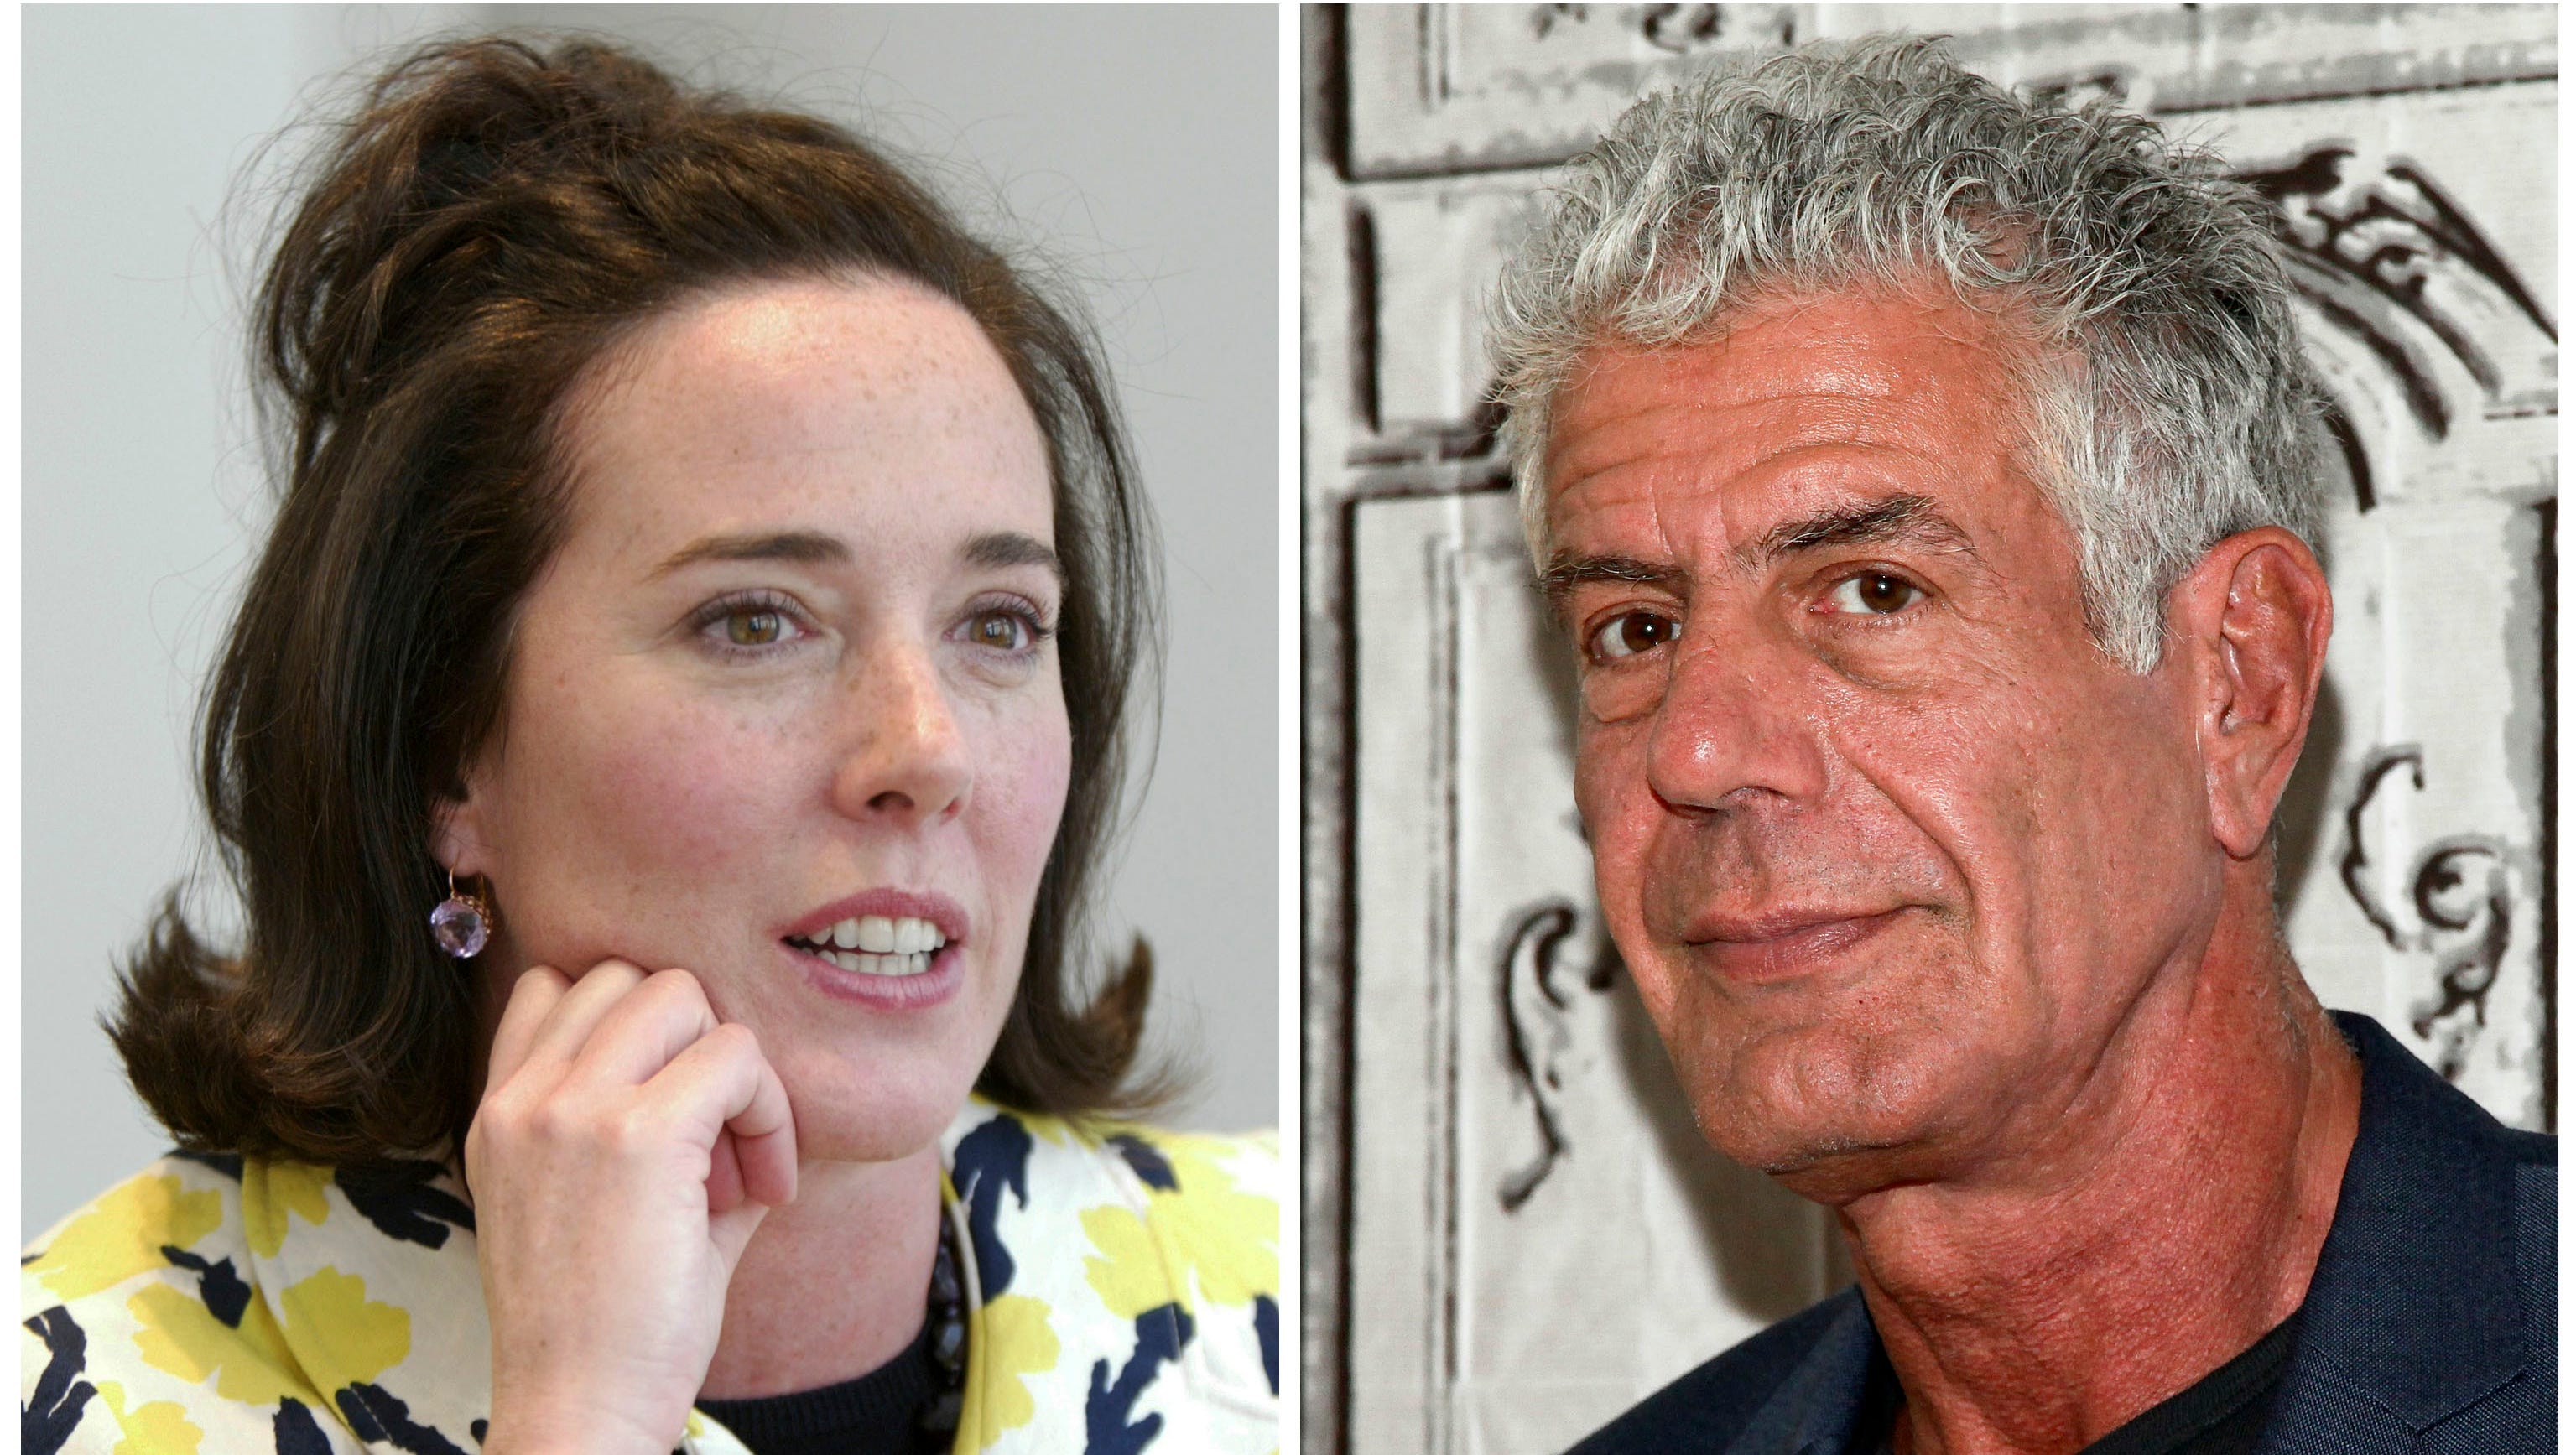 After Kate Spade, Anthony Bourdain suicides, a look at how to prevent deaths